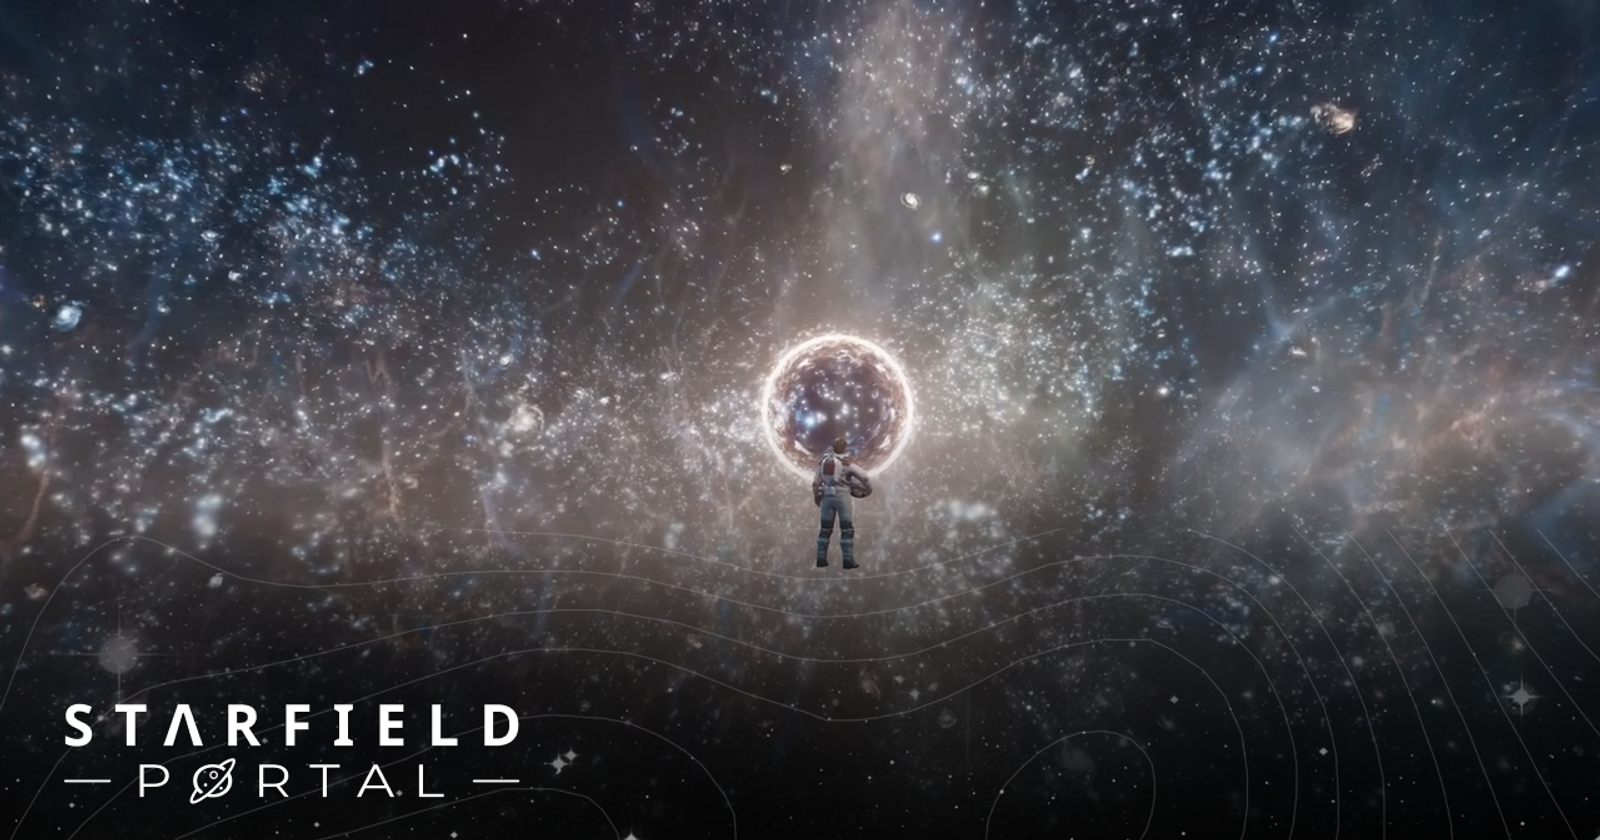 Starfield New Game+, explained - how to start New Game Plus - Polygon